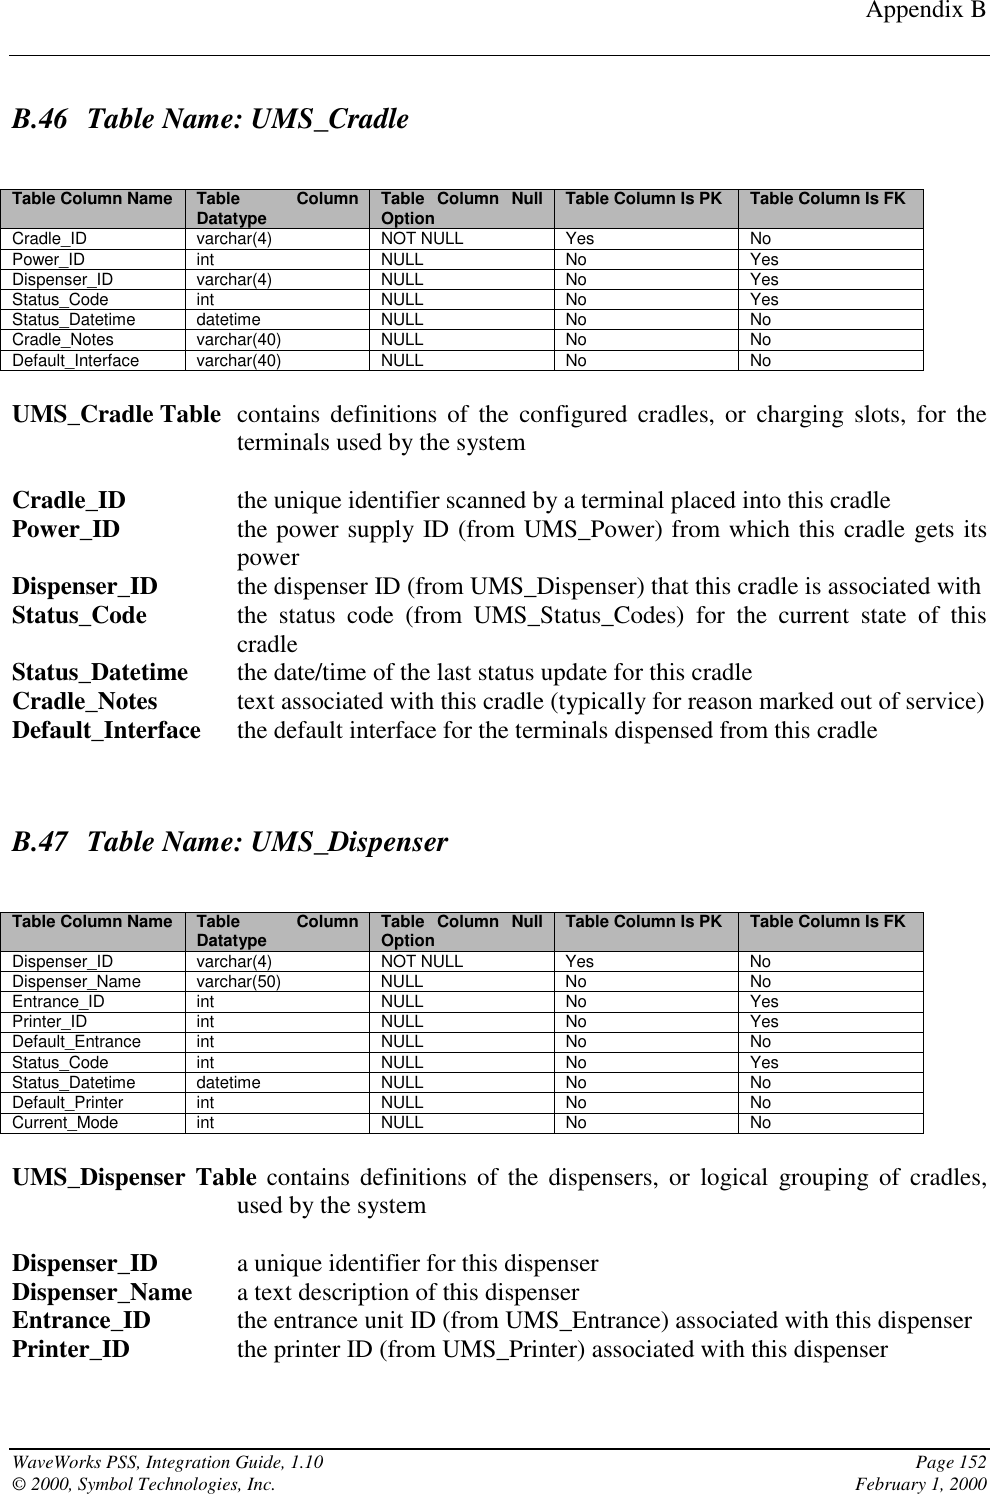 Appendix BWaveWorks PSS, Integration Guide, 1.10 Page 152© 2000, Symbol Technologies, Inc. February 1, 2000B.46 Table Name: UMS_CradleTable Column Name Table ColumnDatatype Table Column NullOption Table Column Is PK Table Column Is FKCradle_ID varchar(4) NOT NULL Yes NoPower_ID int NULL No YesDispenser_ID varchar(4) NULL No YesStatus_Code int NULL No YesStatus_Datetime datetime NULL No NoCradle_Notes varchar(40) NULL No NoDefault_Interface varchar(40) NULL No NoUMS_Cradle Table contains definitions of the configured cradles, or charging slots, for theterminals used by the systemCradle_ID the unique identifier scanned by a terminal placed into this cradlePower_ID the power supply ID (from UMS_Power) from which this cradle gets itspowerDispenser_ID the dispenser ID (from UMS_Dispenser) that this cradle is associated withStatus_Code the status code (from UMS_Status_Codes) for the current state of thiscradleStatus_Datetime the date/time of the last status update for this cradleCradle_Notes text associated with this cradle (typically for reason marked out of service)Default_Interface the default interface for the terminals dispensed from this cradleB.47 Table Name: UMS_DispenserTable Column Name Table ColumnDatatype Table Column NullOption Table Column Is PK Table Column Is FKDispenser_ID varchar(4) NOT NULL Yes NoDispenser_Name varchar(50) NULL No NoEntrance_ID int NULL No YesPrinter_ID int NULL No YesDefault_Entrance int NULL No NoStatus_Code int NULL No YesStatus_Datetime datetime NULL No NoDefault_Printer int NULL No NoCurrent_Mode int NULL No NoUMS_Dispenser Table contains definitions of the dispensers, or logical grouping of cradles,used by the systemDispenser_ID a unique identifier for this dispenserDispenser_Name a text description of this dispenserEntrance_ID the entrance unit ID (from UMS_Entrance) associated with this dispenserPrinter_ID the printer ID (from UMS_Printer) associated with this dispenser